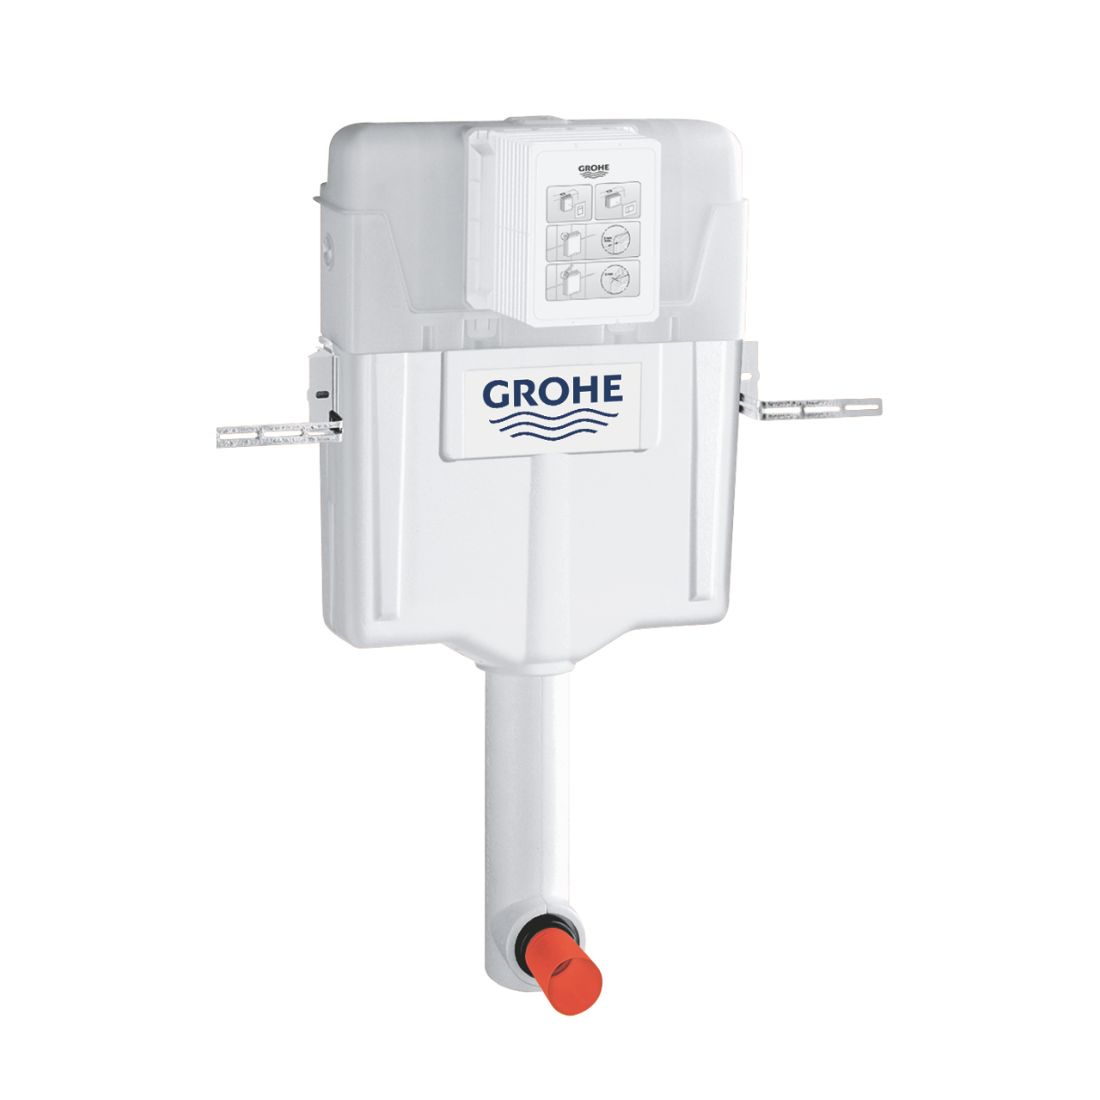 Grohe 38987000 Flushing Cistern GD 2